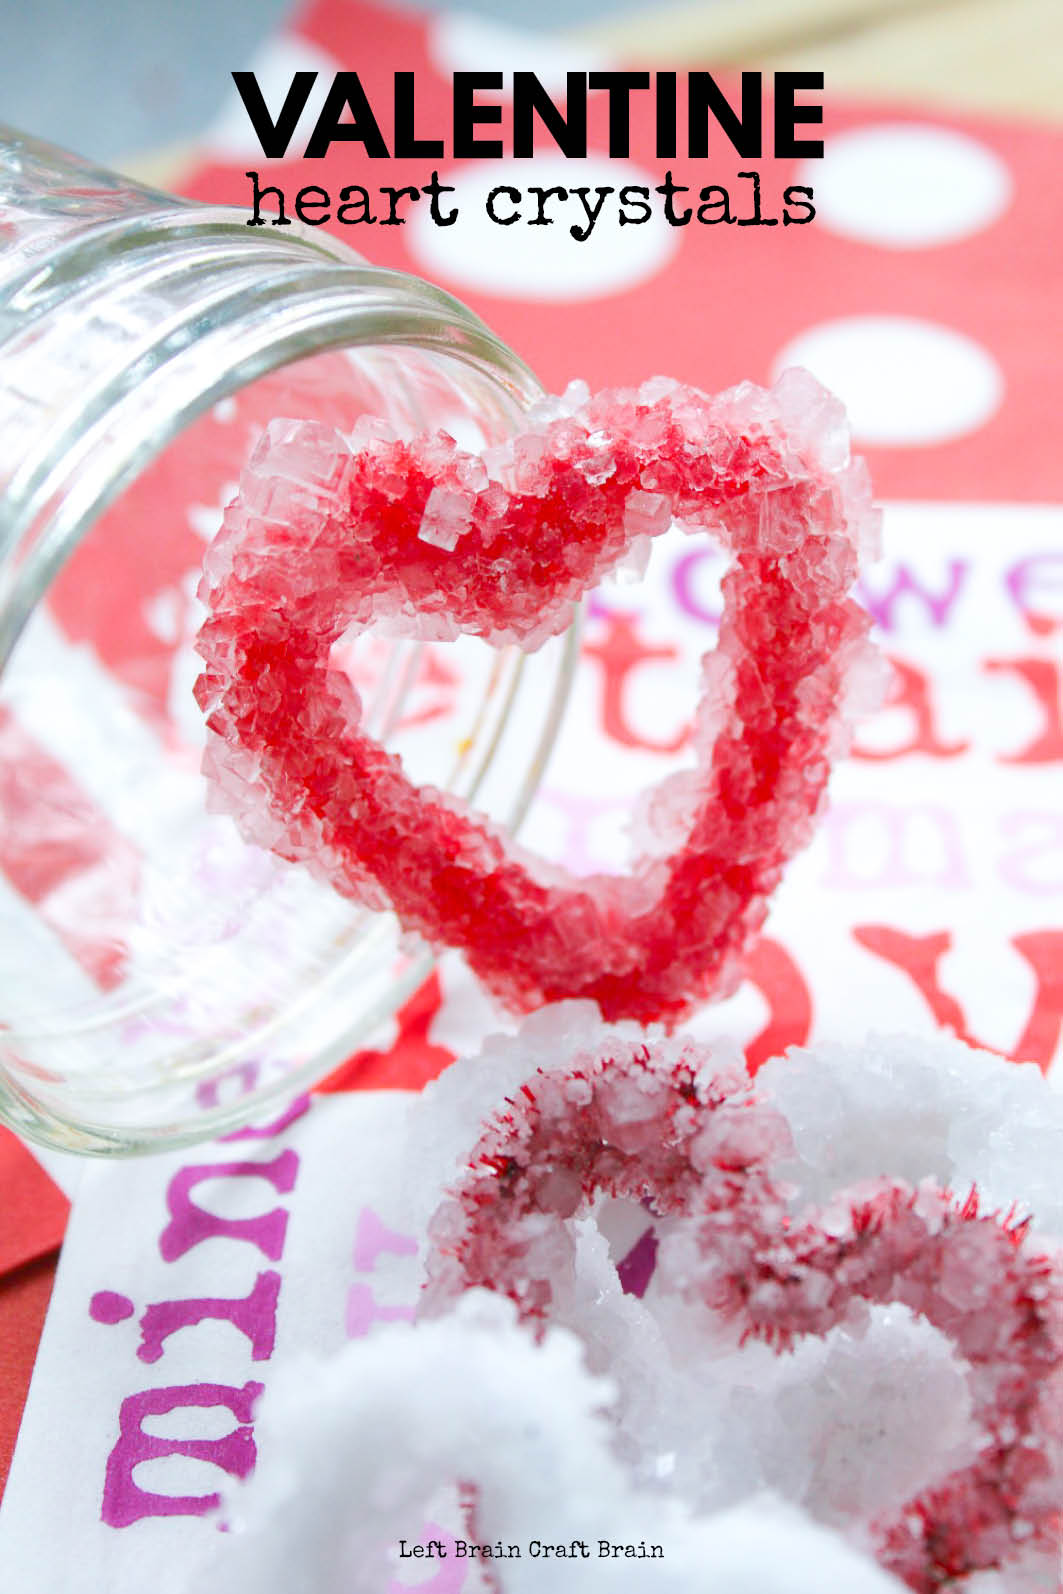 Grow these lovely Valentine Heart Borax Crystals for a fun science experiment this February. Kids will love customizing their hearts and watching the crystals grow.